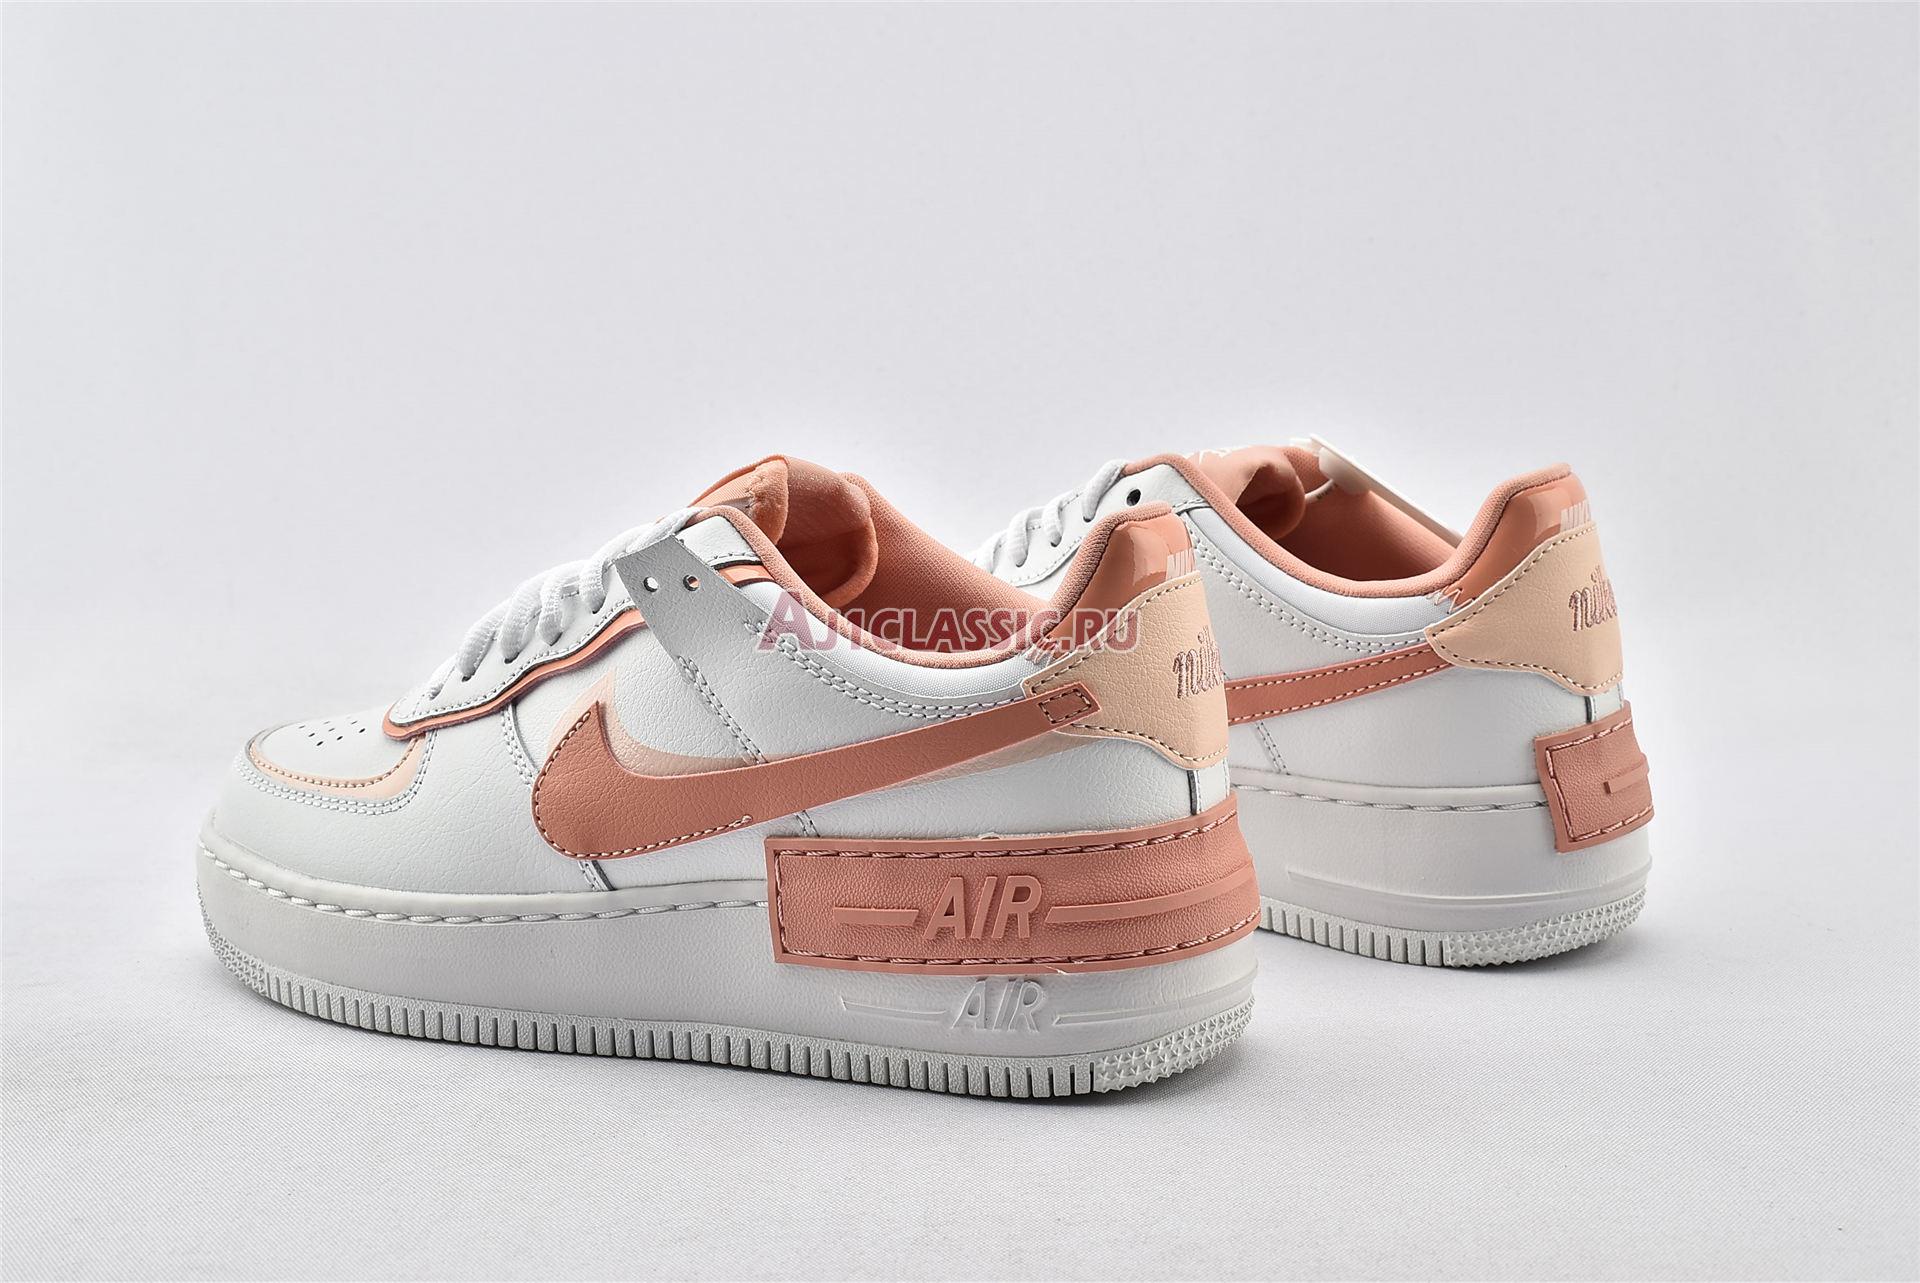 Nike Wmns Air Force 1 Shadow "Washed Coral" CJ1641-101